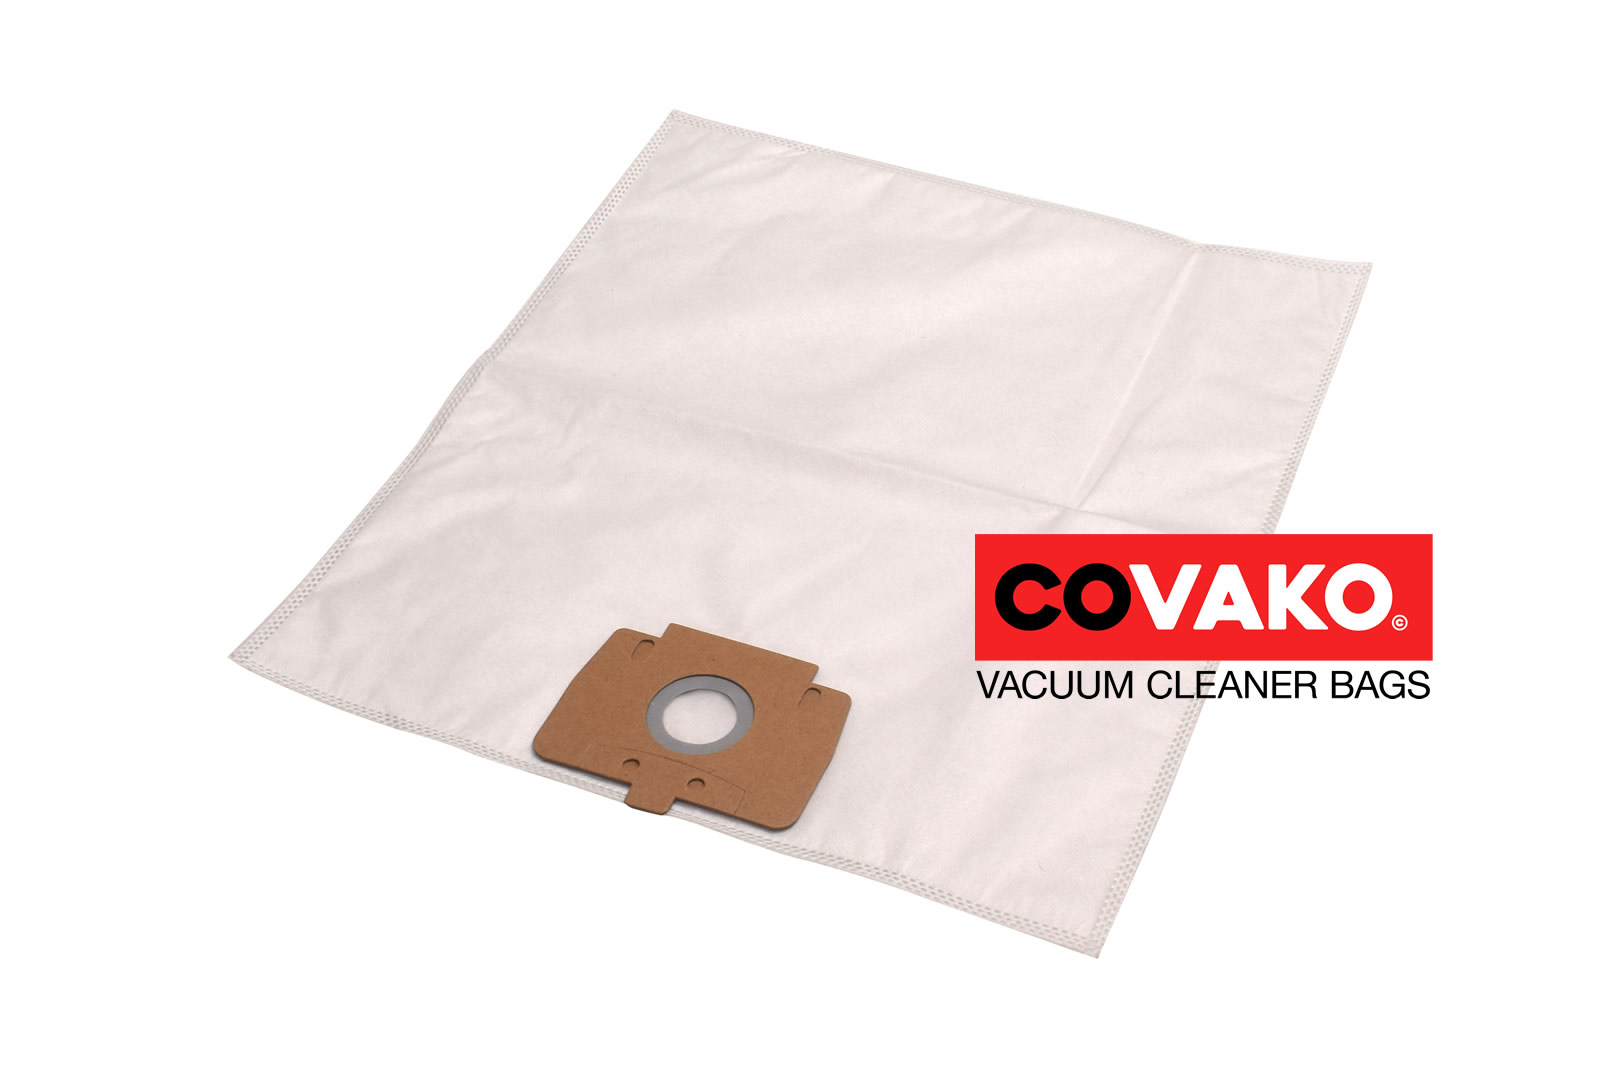 Ecolab S 12 / Synthesis - Ecolab vacuum cleaner bags